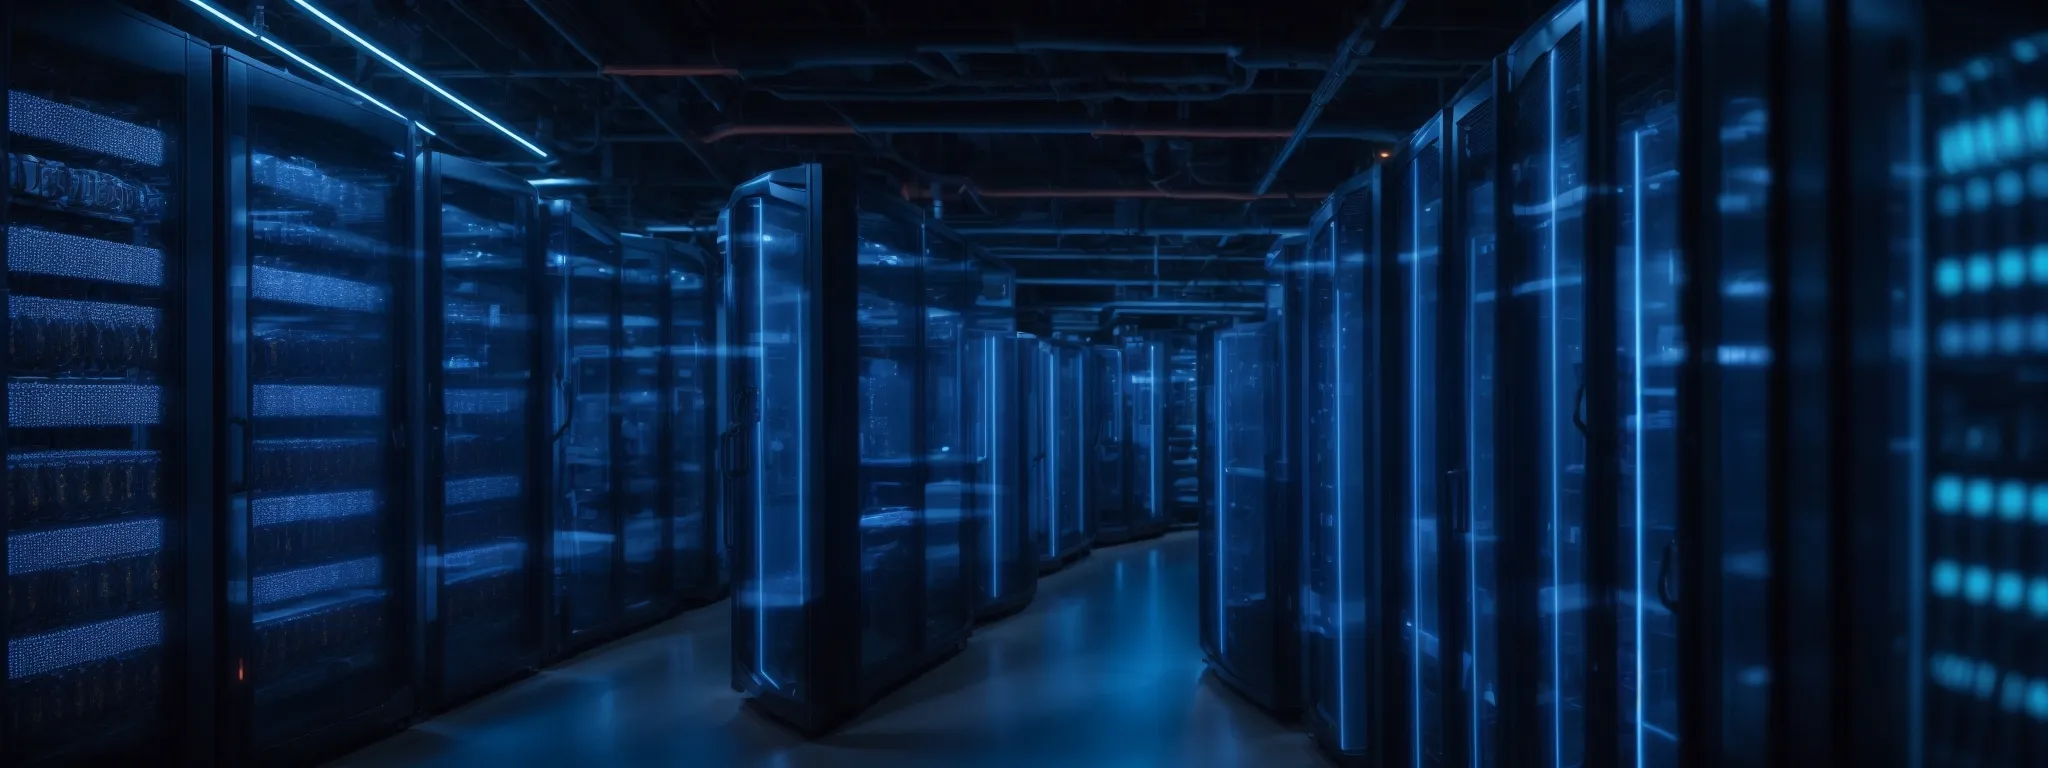 a row of illuminated server racks in a data center with glowing blue lights representing the digital infrastructure of crm solutions.